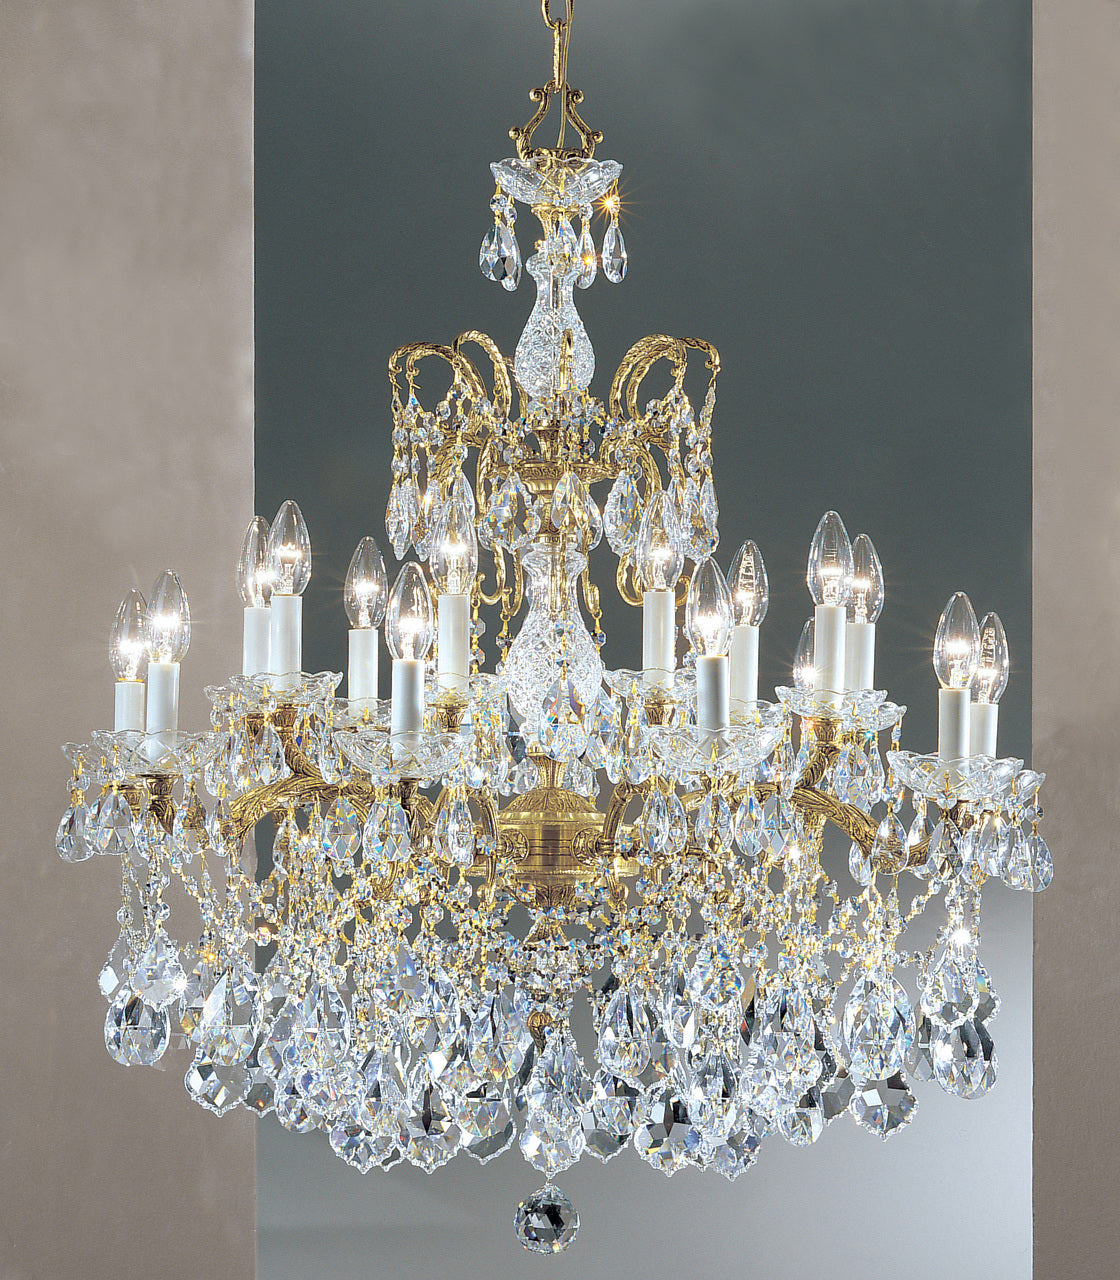 Classic Lighting 5548 OWB CGT Madrid Imperial Crystal/Cast Brass Chandelier in Olde World Bronze (Imported from Spain)